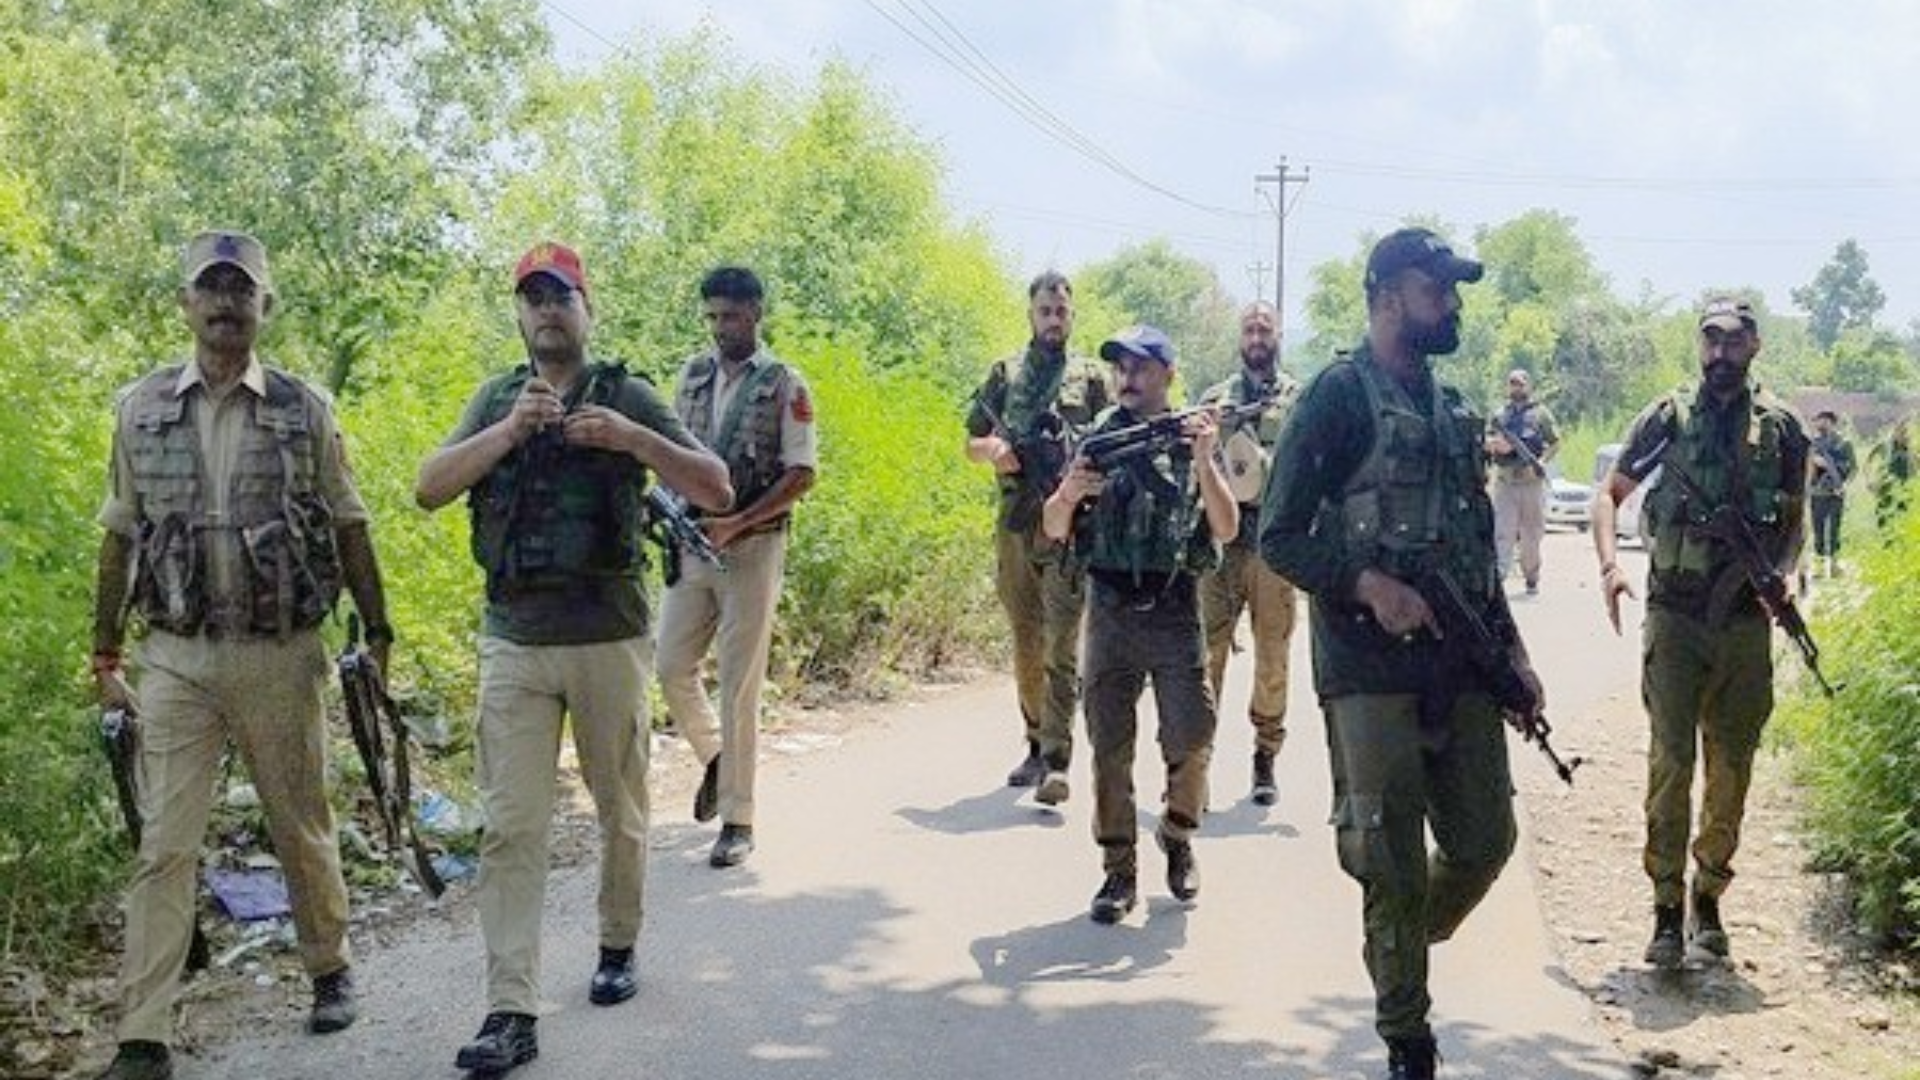 Doda Encounter: Encounter and Exchange of Fire Reported, Ongoing Search Operations